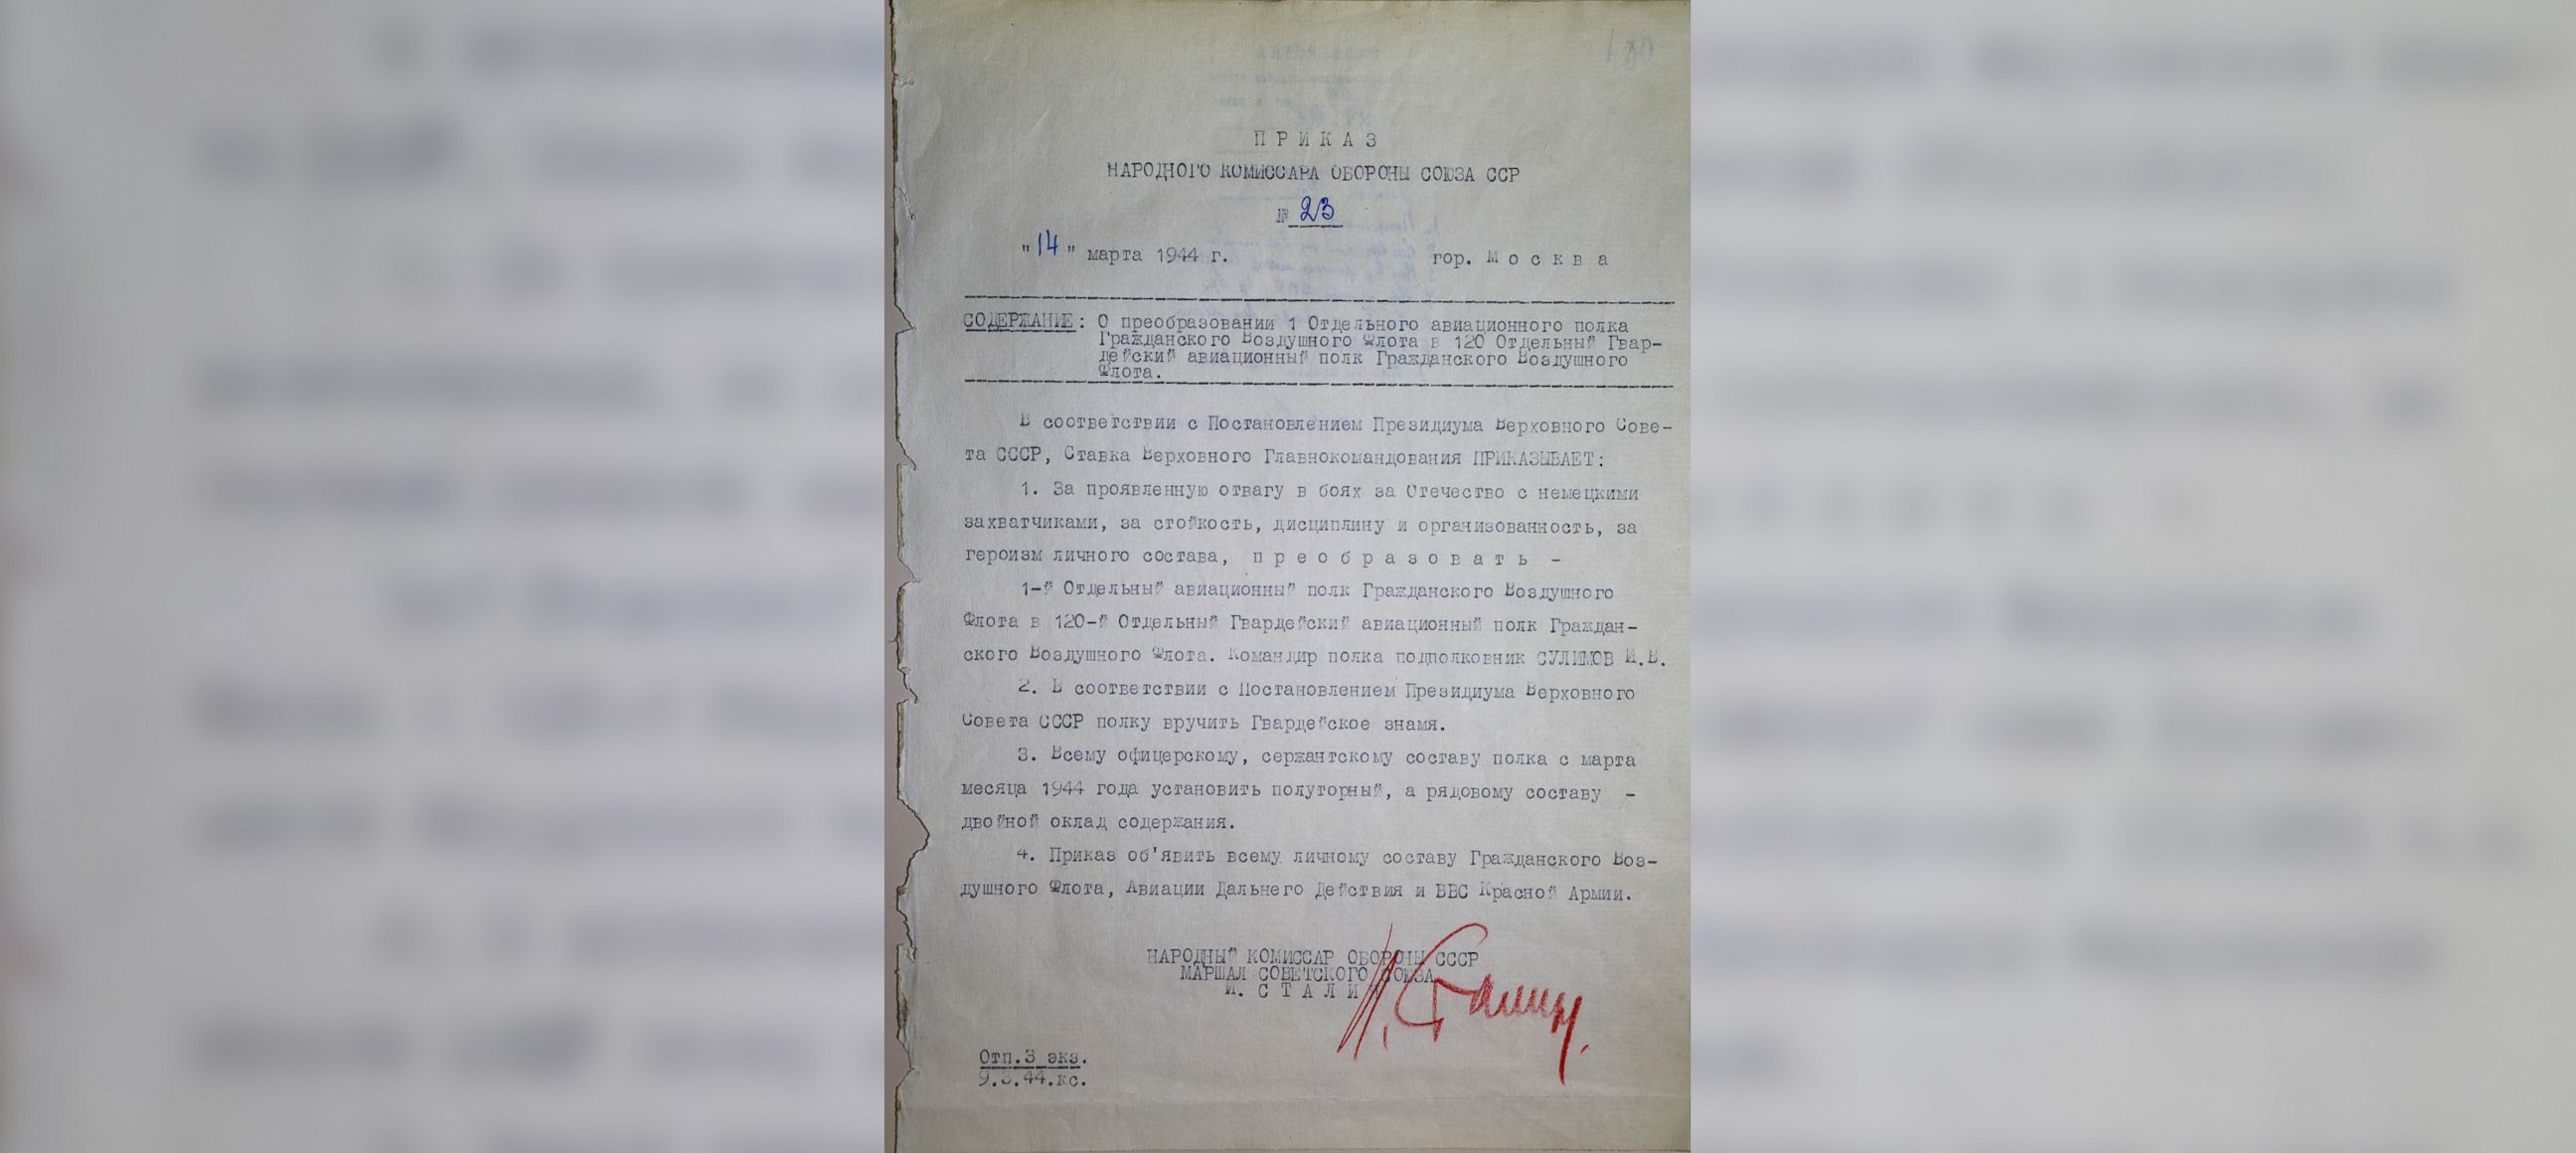 PHOTO: A military order signed by Joseph Stalin in 1944 and stolen from Russia’s State Military Archives, now recovered by U.S. law enforcement agents. 